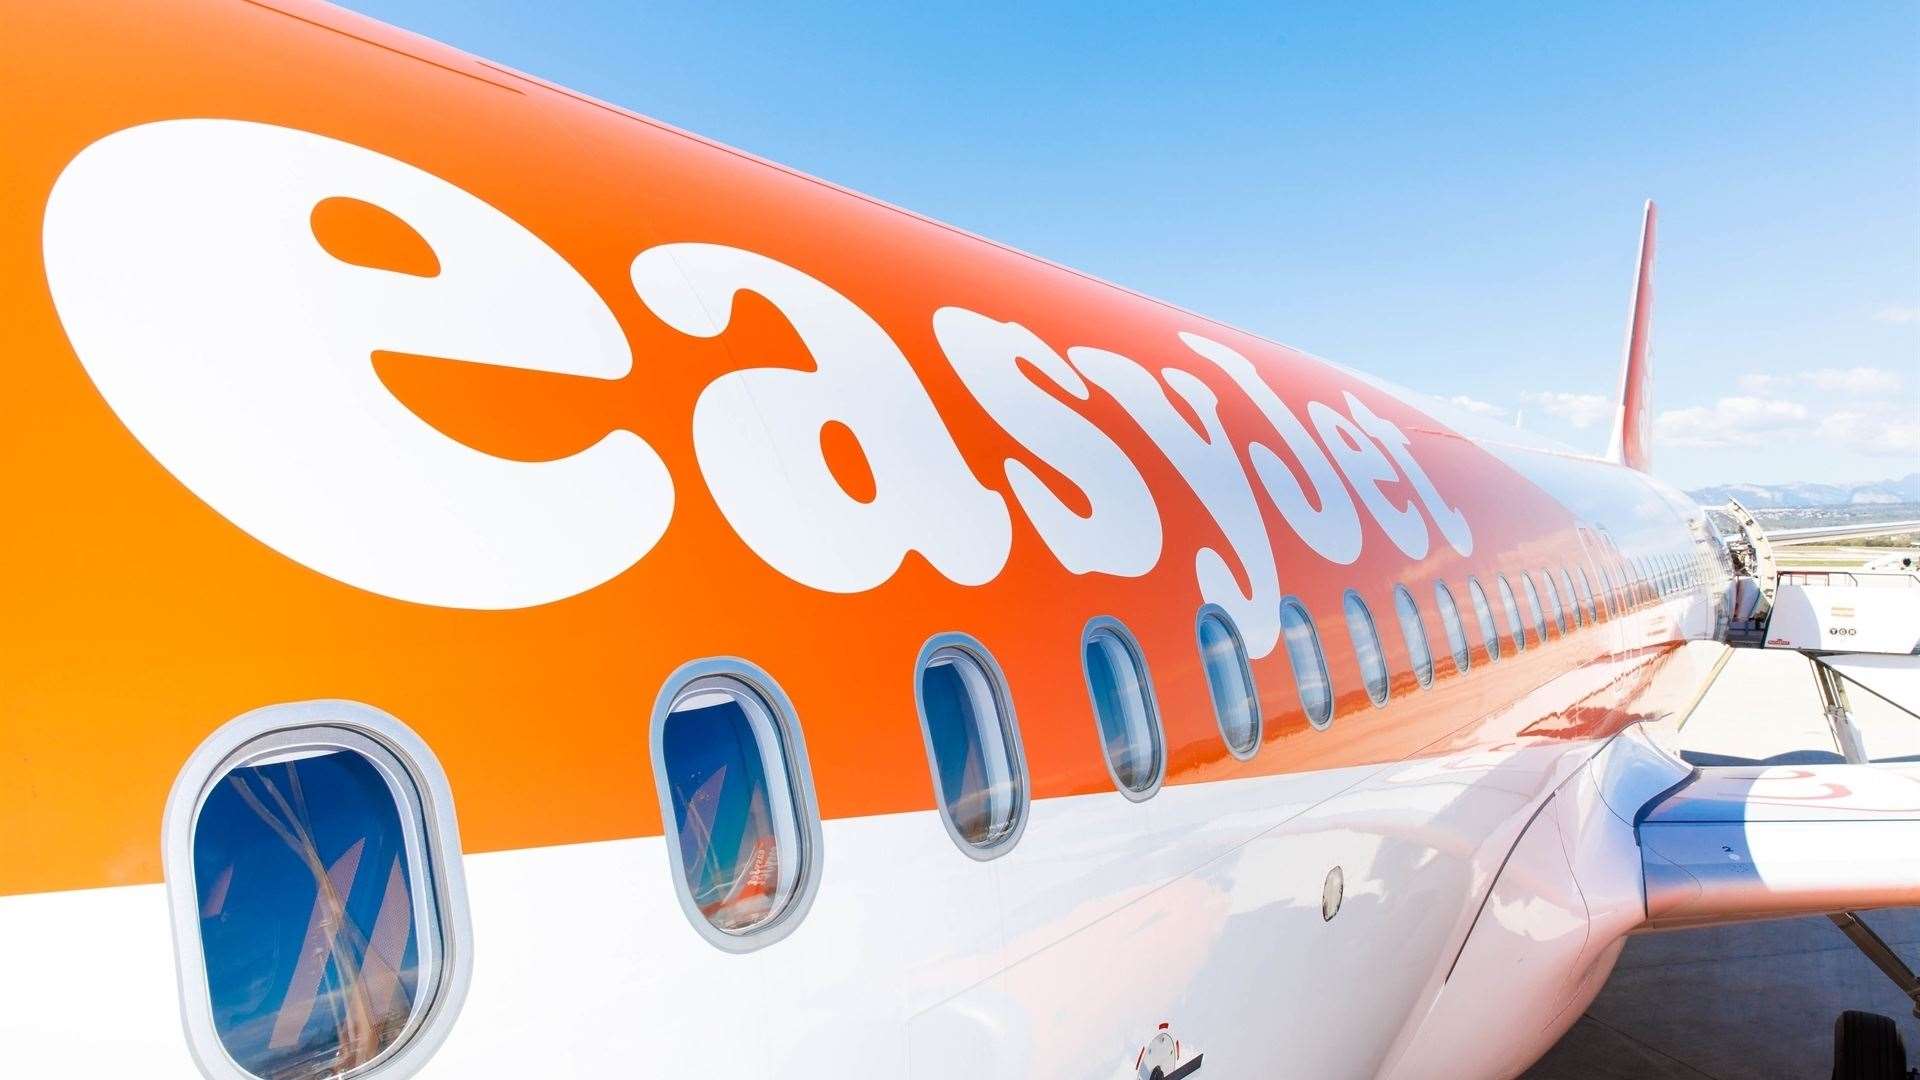 The early morning EasyJet flight from Inverness to London Gatwick was cancelled.